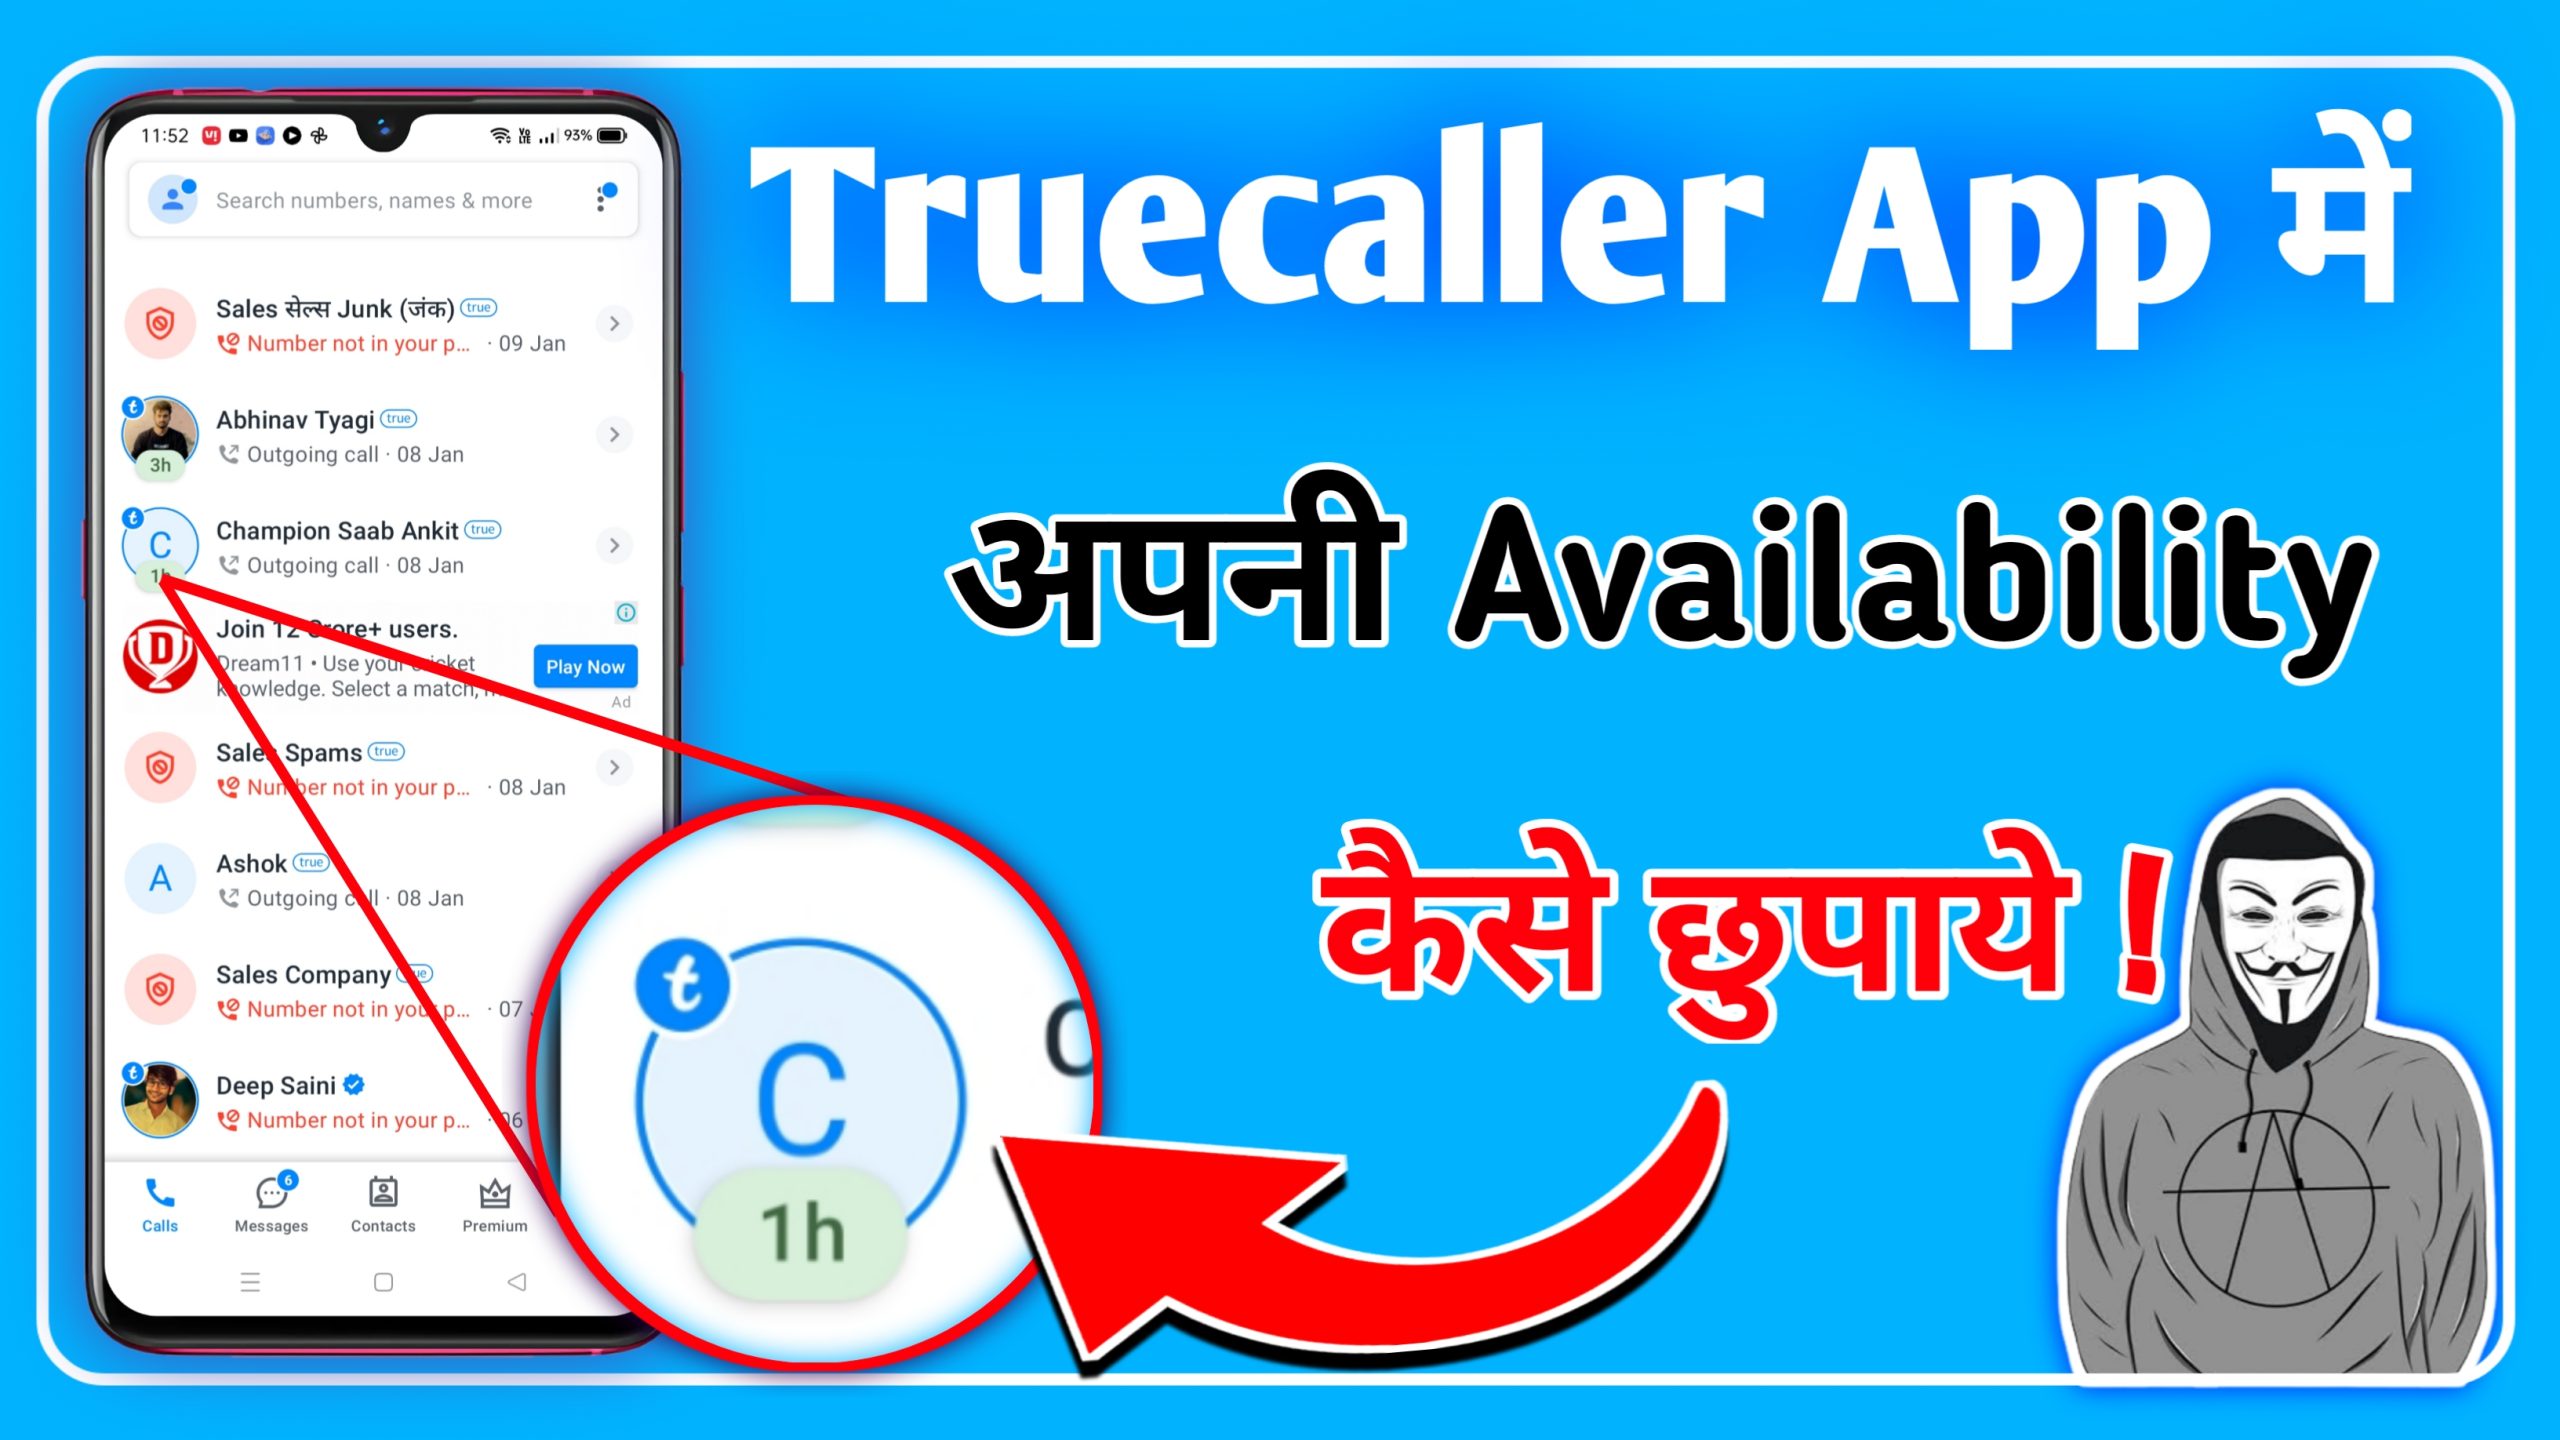 How to Hide Availability on Truecaller | Truecaller App Par Apni Availability Hide Kaise Kare  